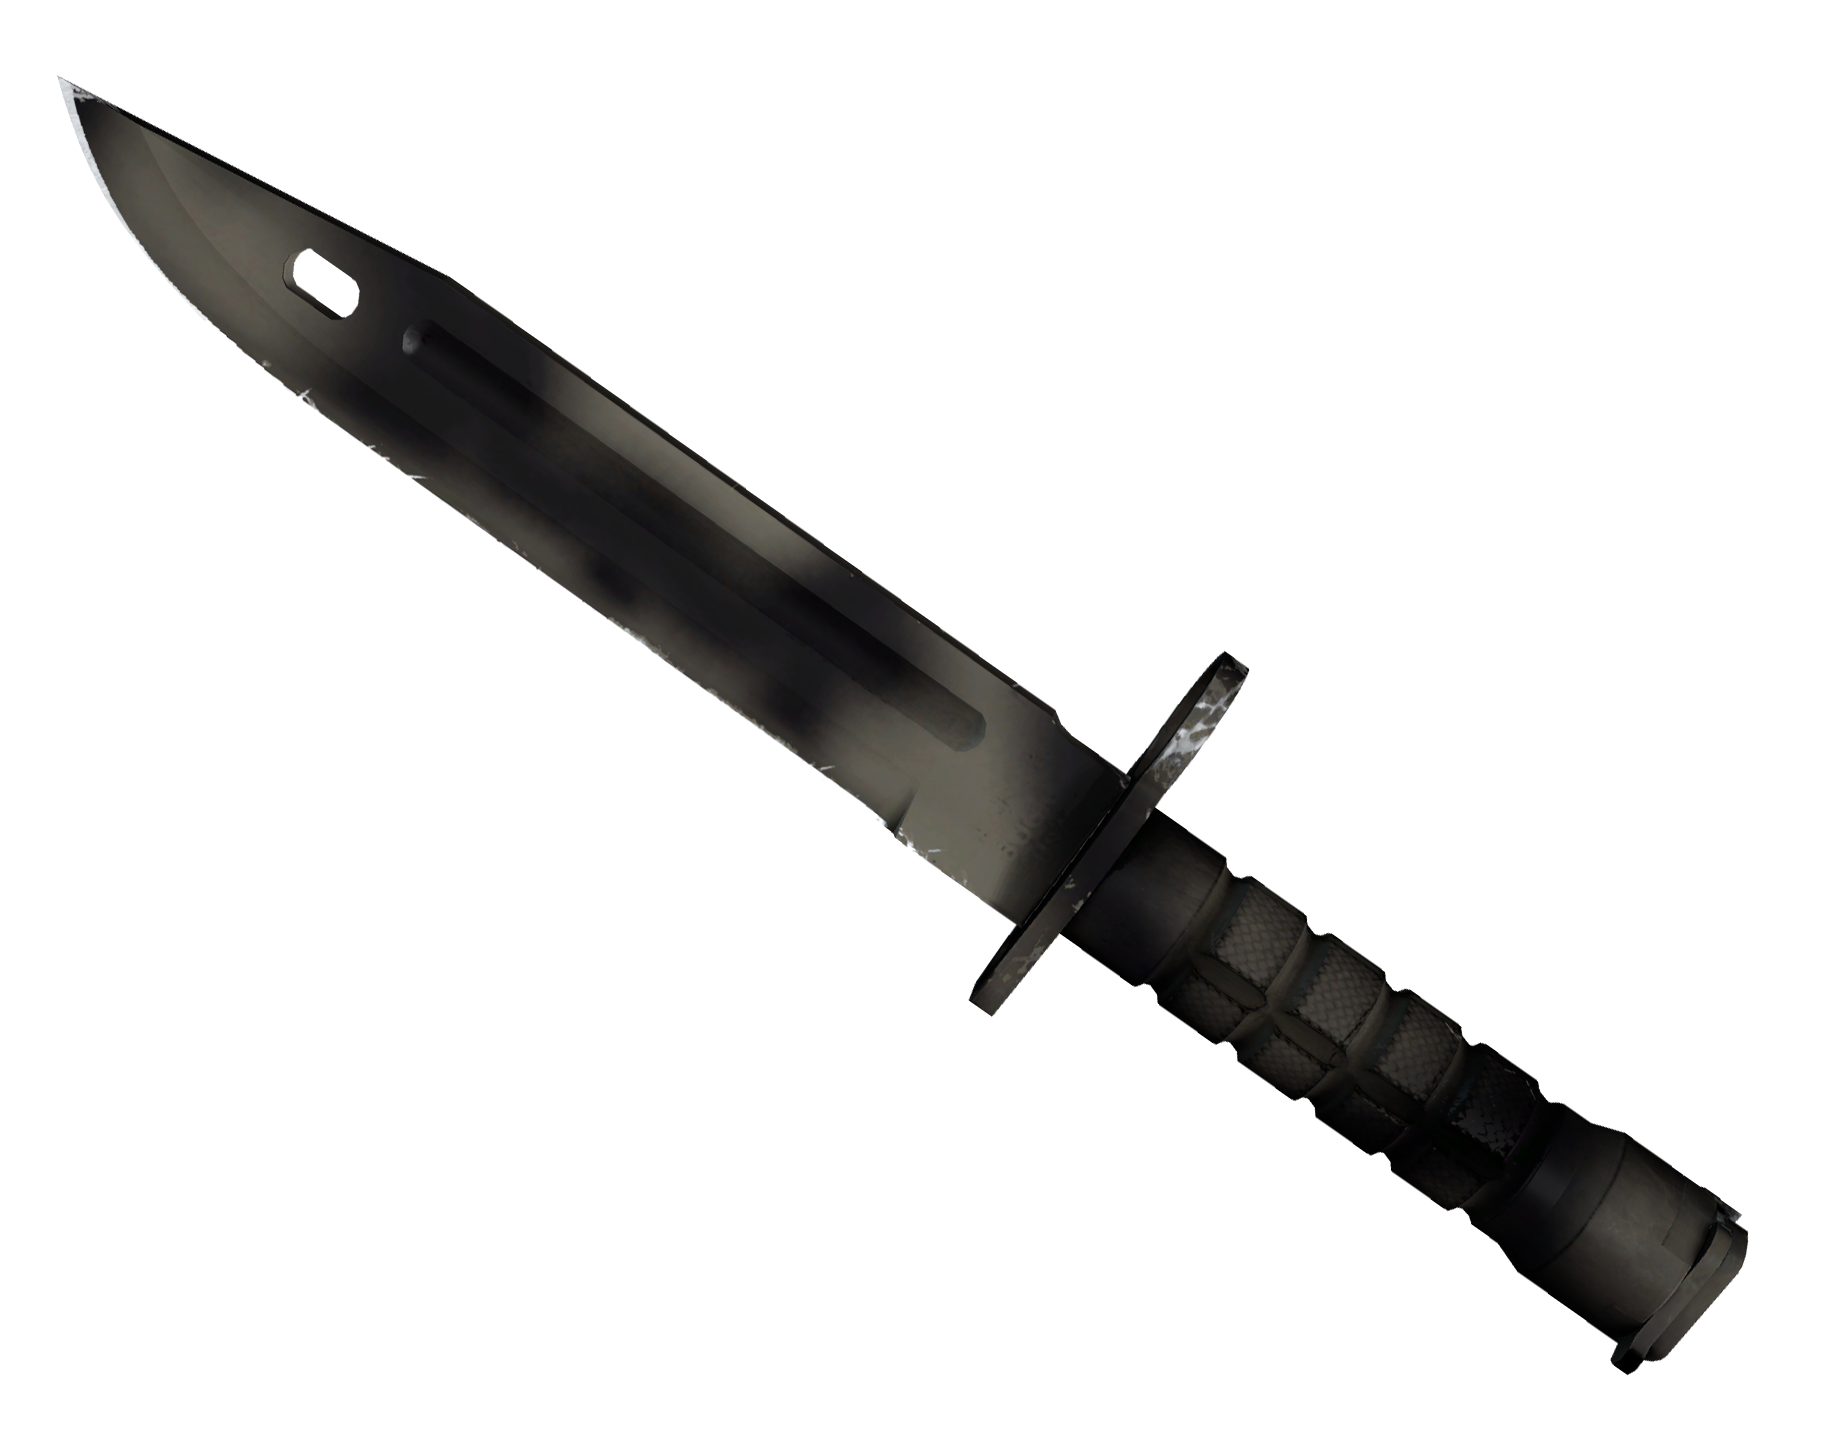 Bayonet Scorched Large Rendering